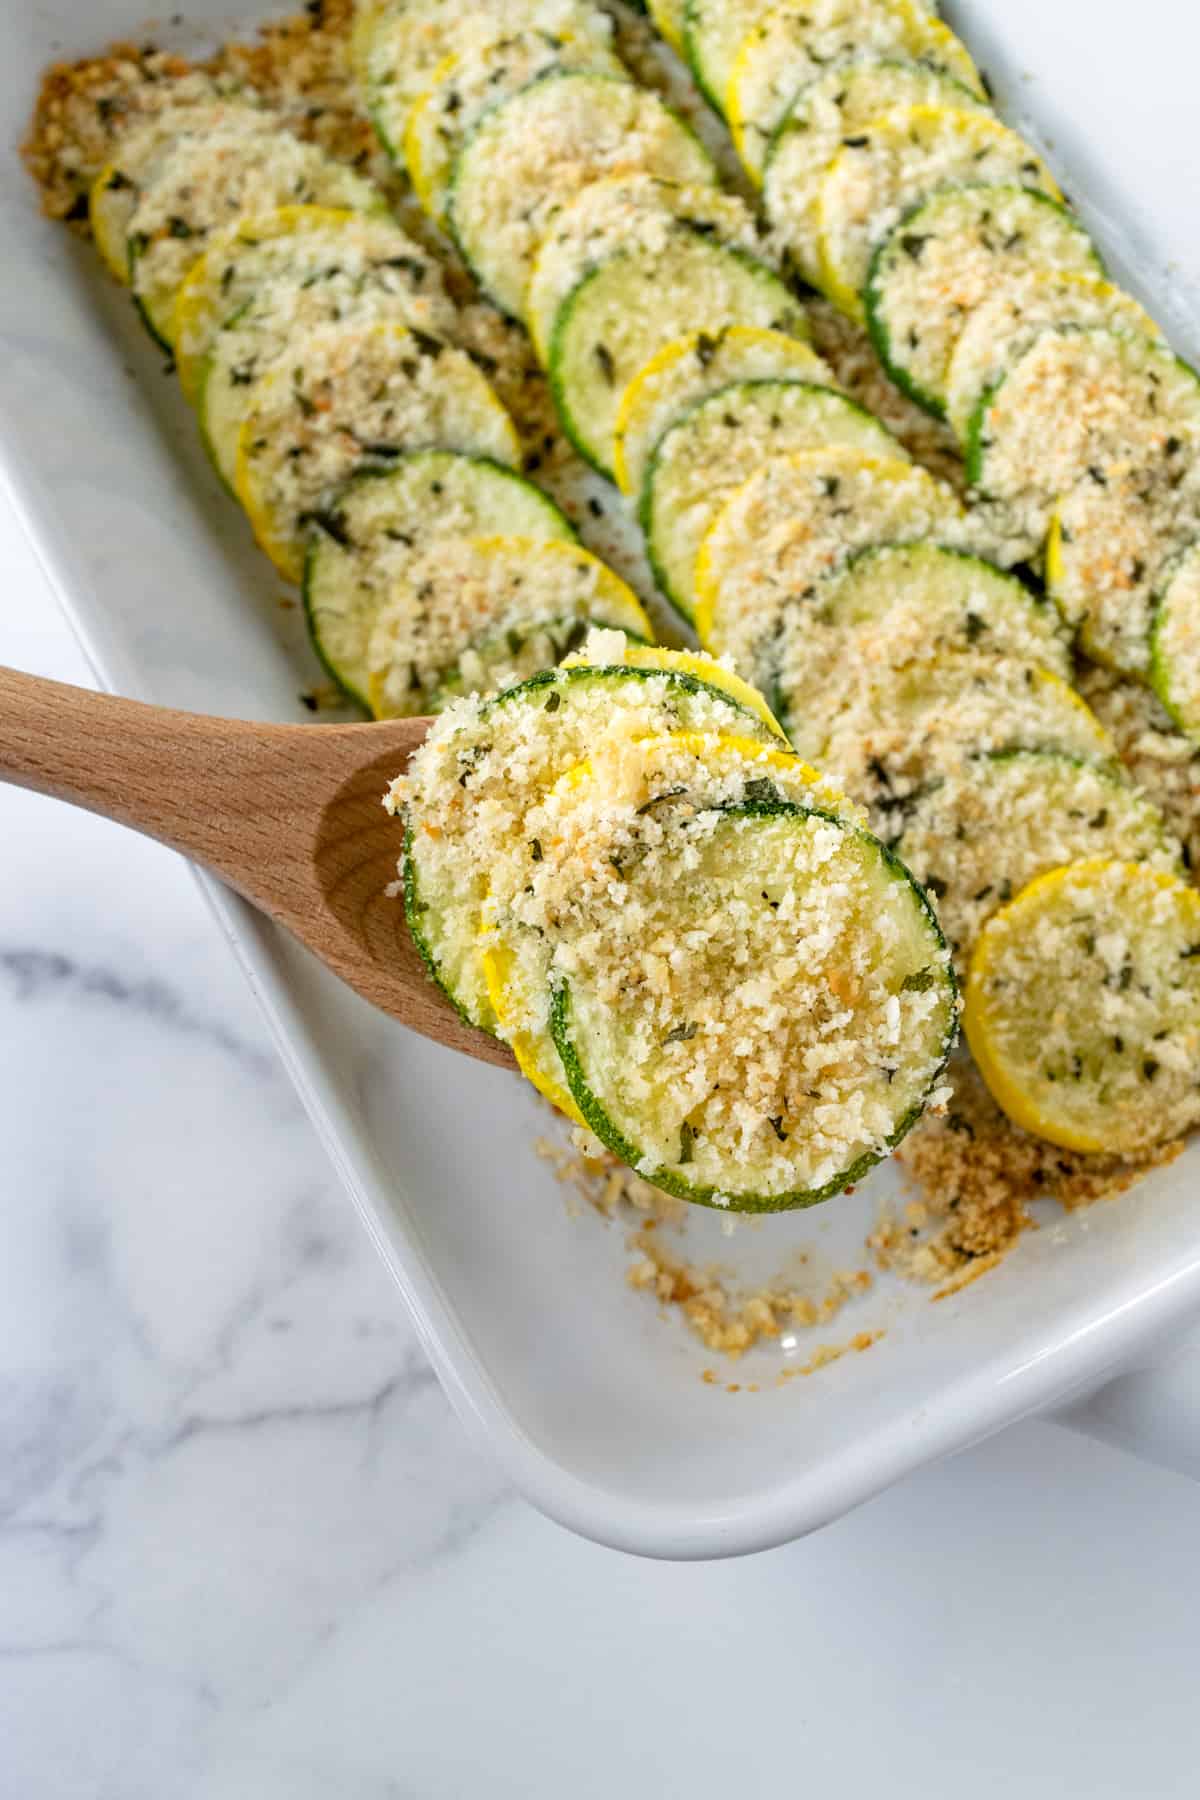 Zucchini and Squash Bake with a serving spoon.